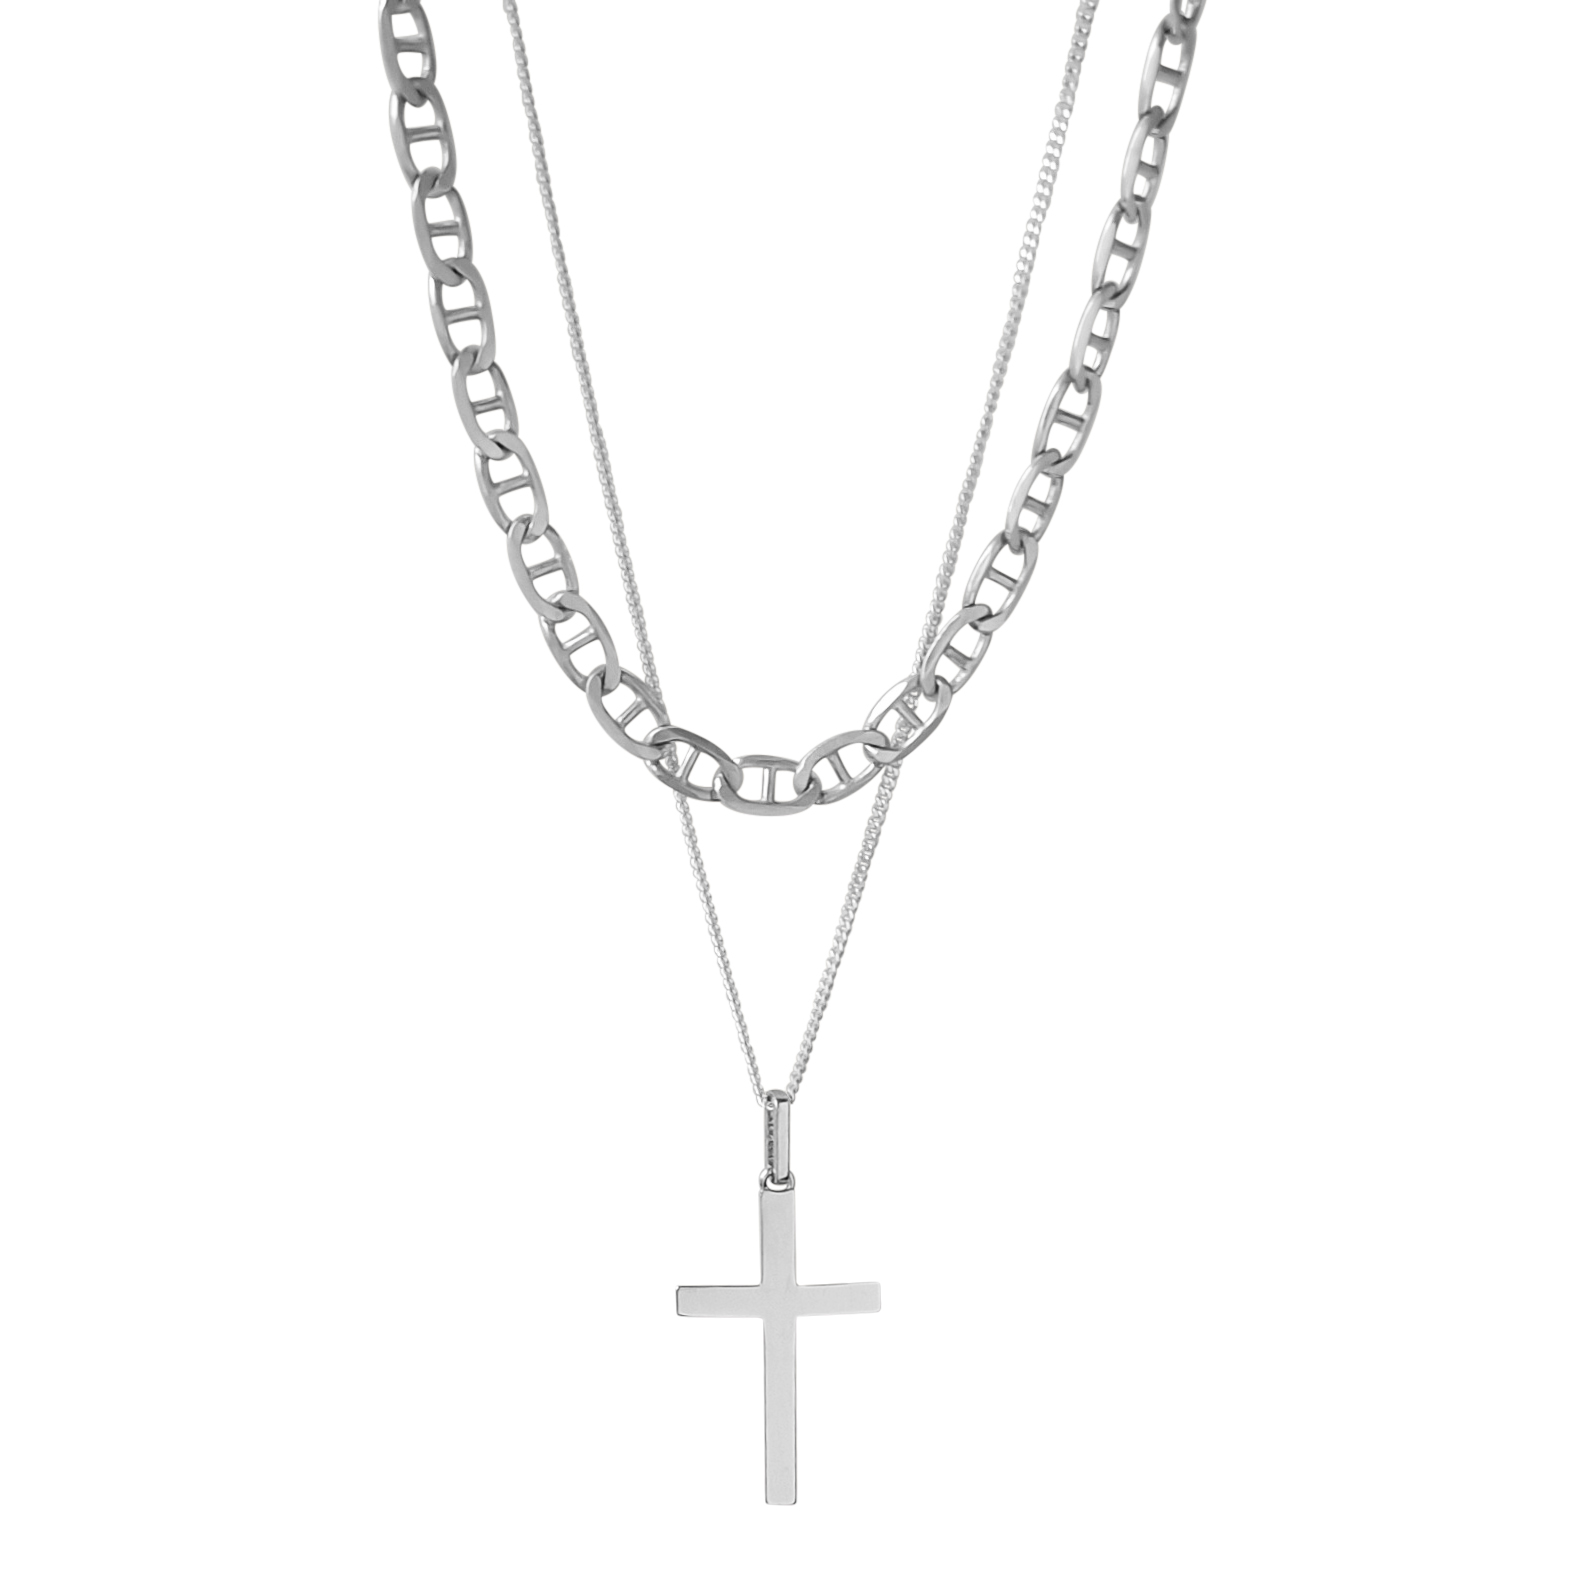 Mens chian and cross necklace set